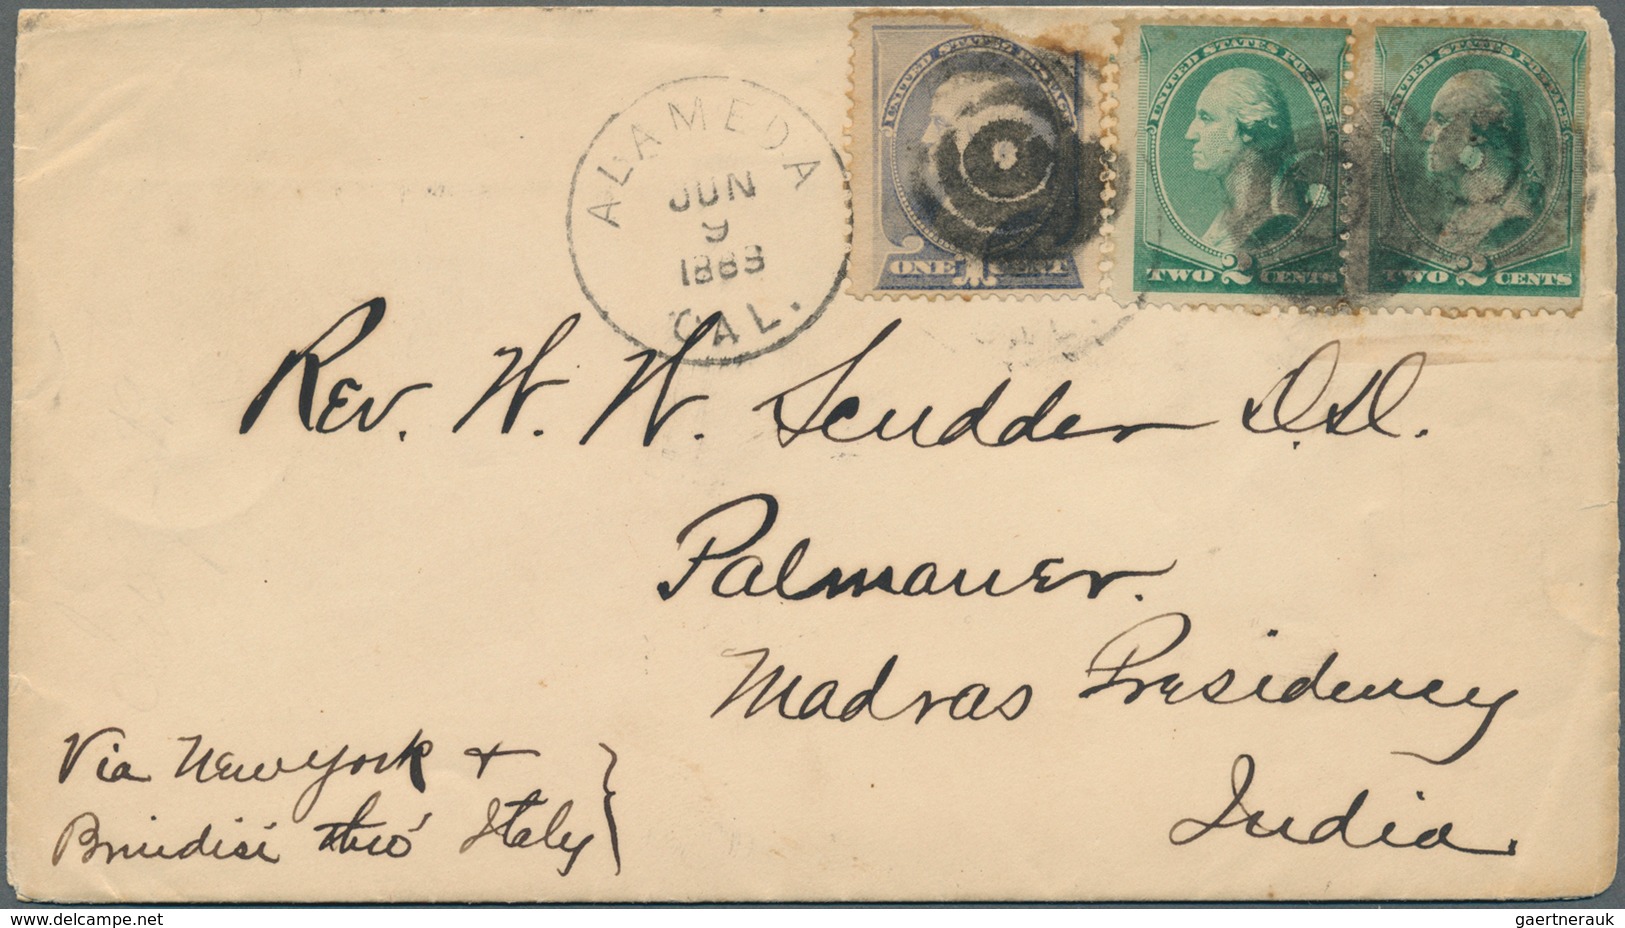 Indien: 1887-1902: Four Covers And Postal Stationery Items From India To The U.S.A. And One Cover (1 - 1852 Sind Province